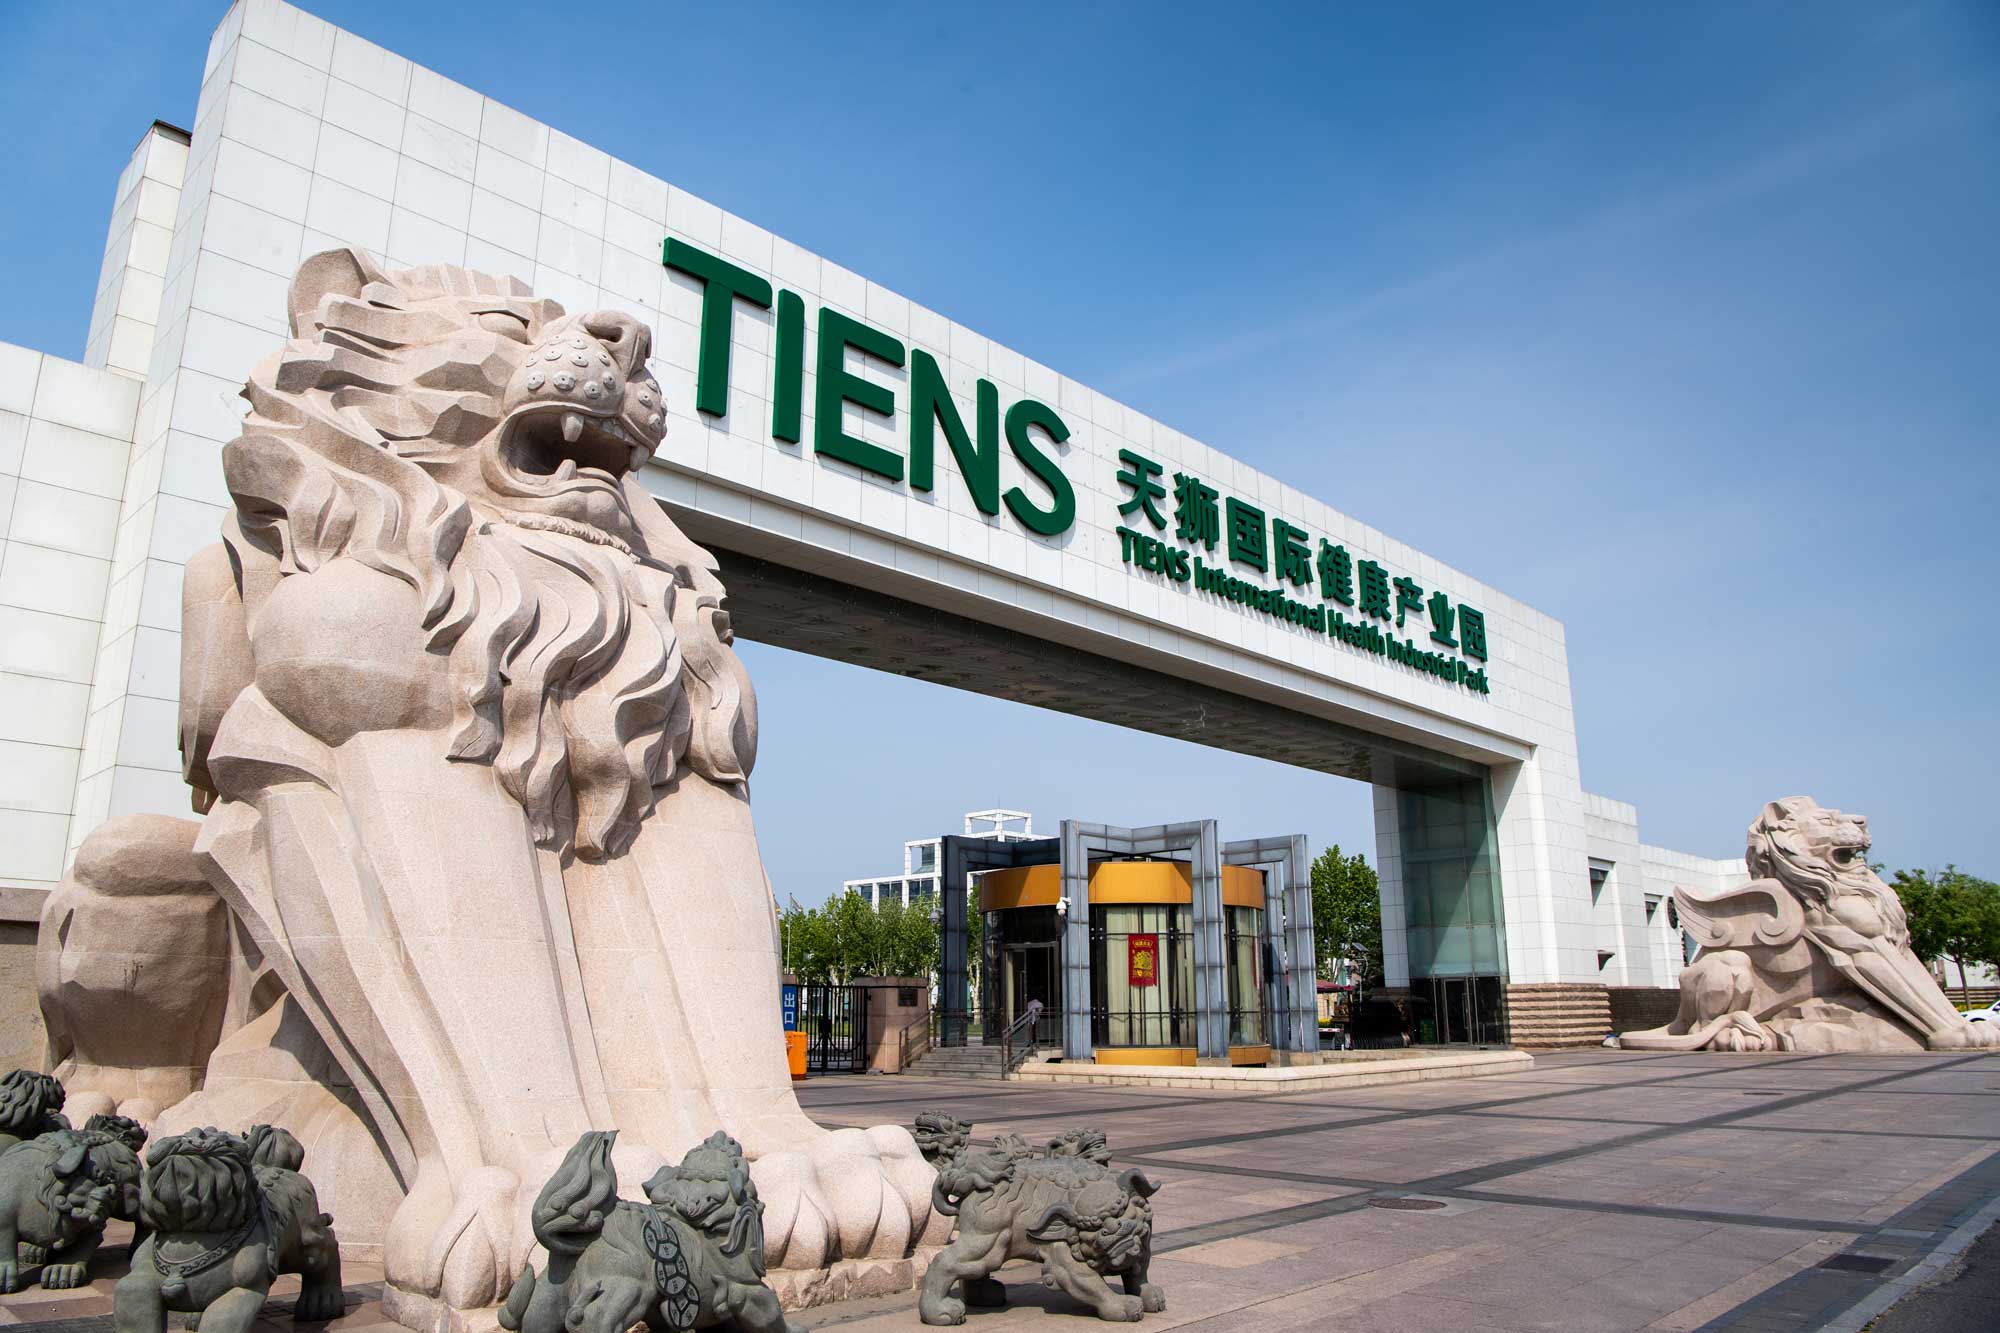 The Gate of Tiens Industrial Park